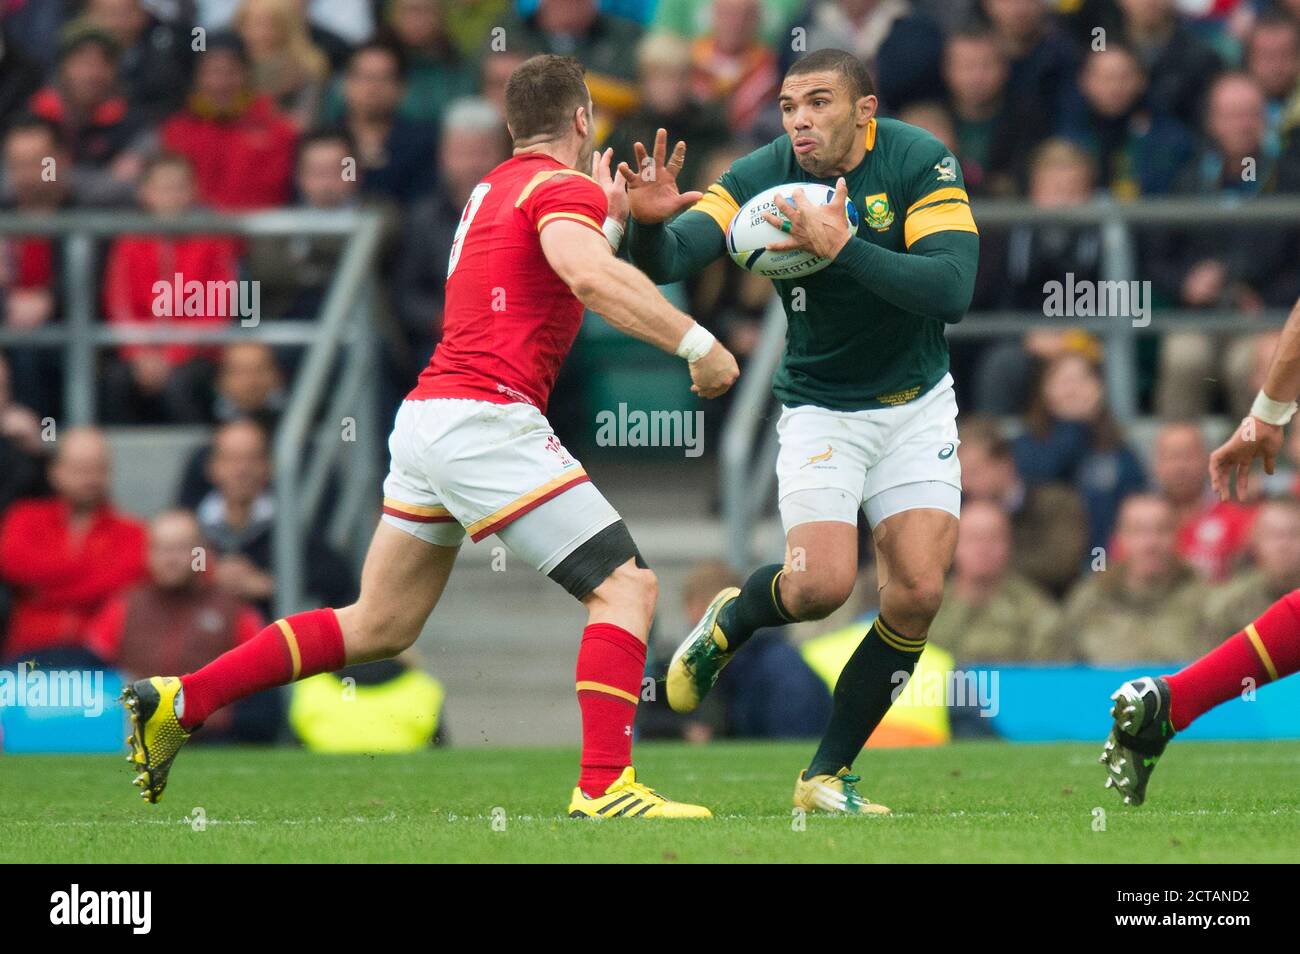 BRYAN HABANA IS CLOSED DOWN QUICKLY BY GARETH DAVIES Wales v South Africa Quarter Final RWC 2015  PICTURE : MARK PAIN / ALAMY Stock Photo